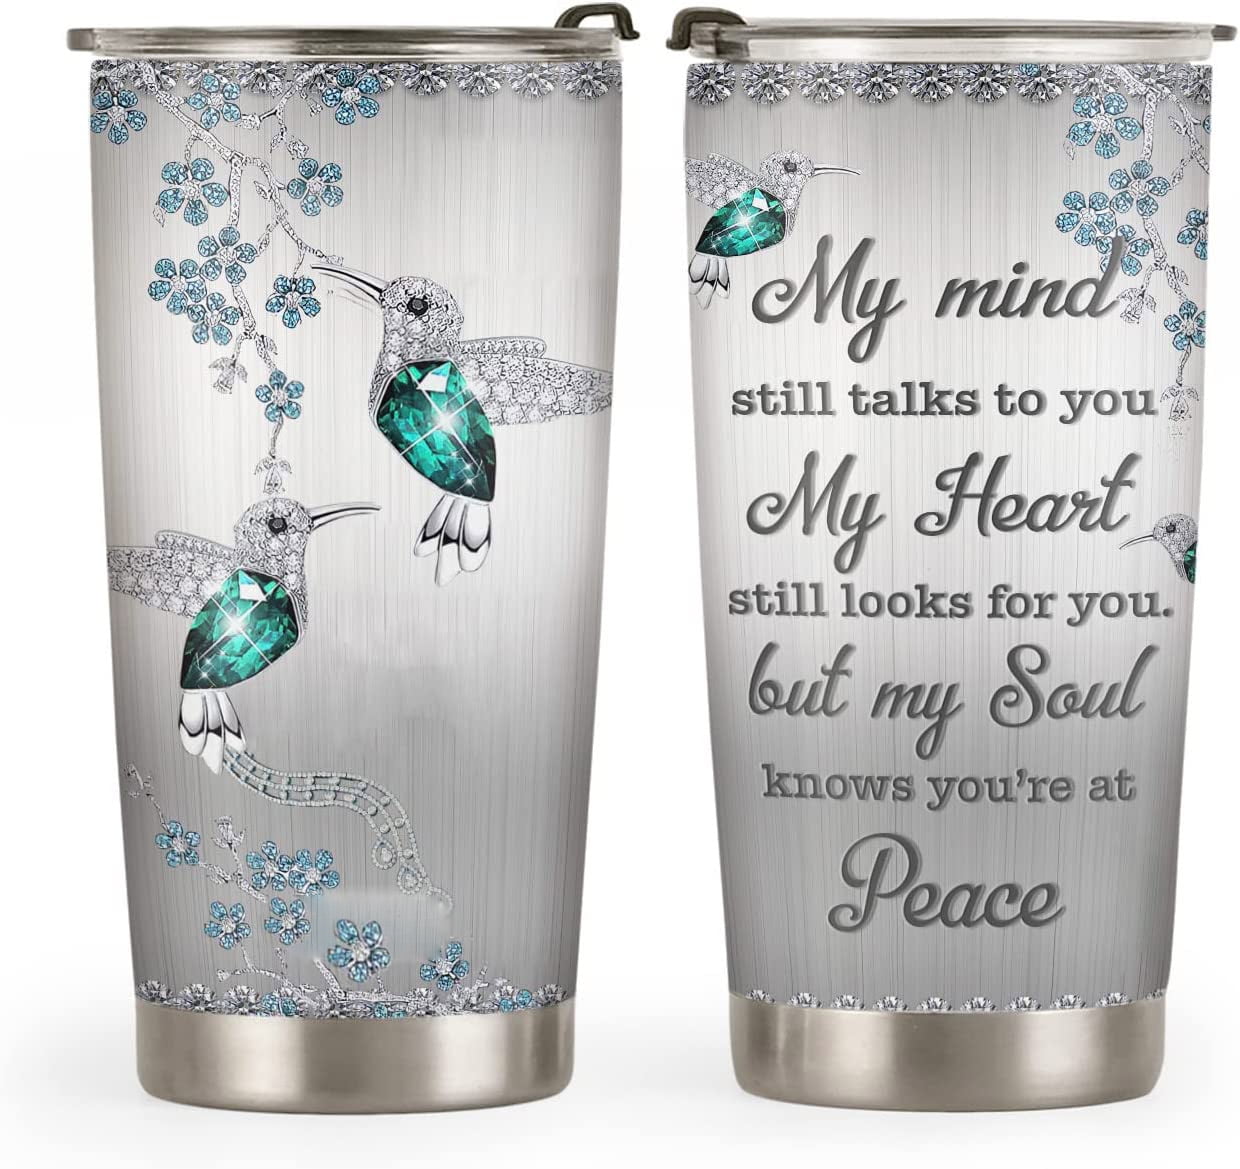 20oz Koala Gifts for Koala Lovers, Valentines Day Gifts for Her, Printed  Koala Advice Jewelry Style Tumbler Cup, Travel Coffee Mug with Lid 